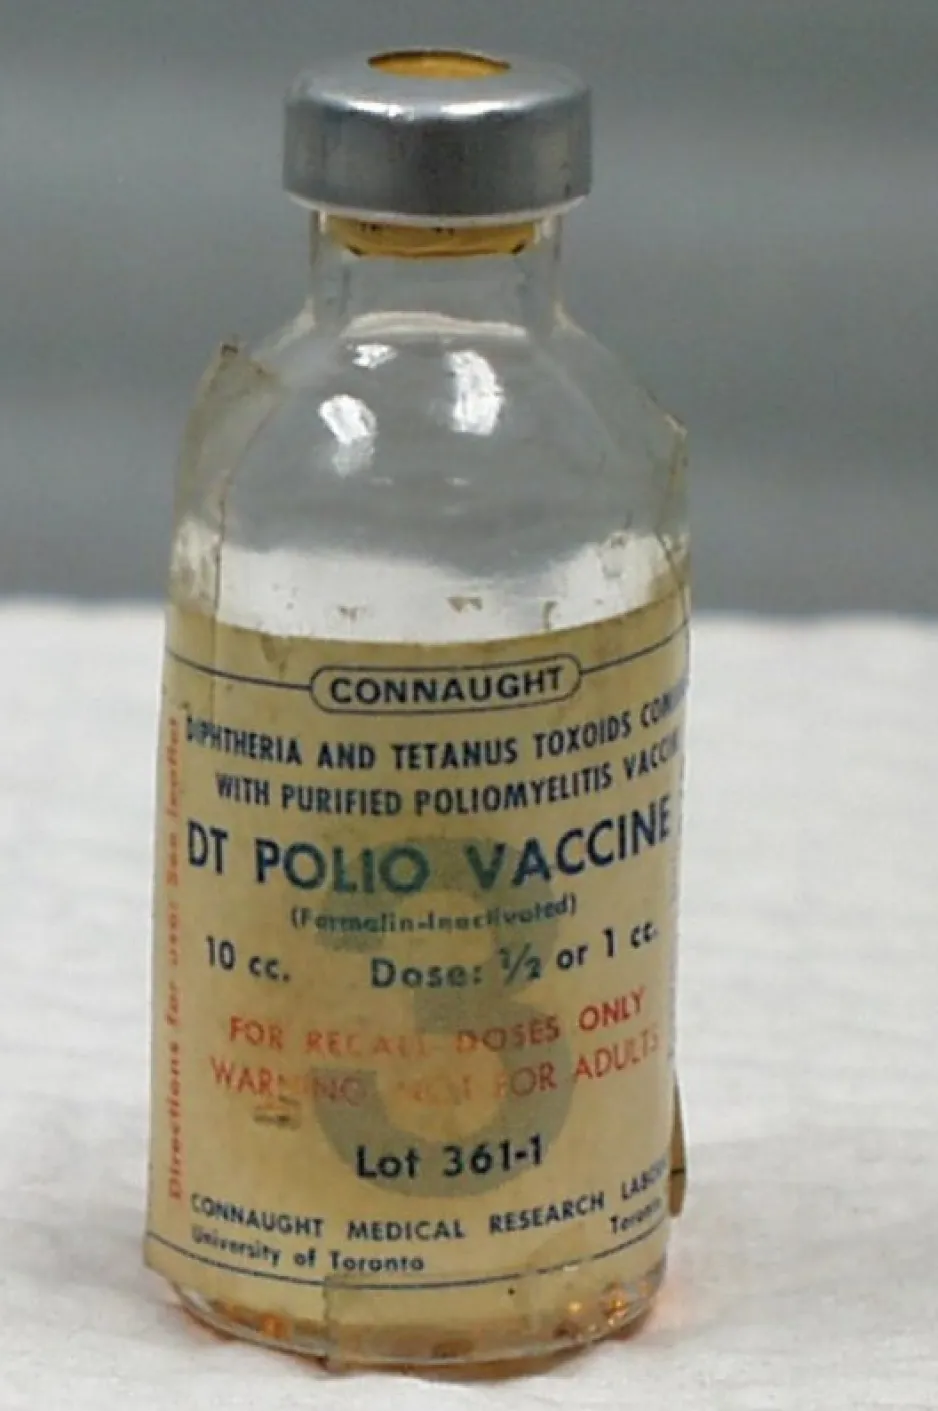 A small, empty, glass vial with a faded label that reads, “DT Polio Vaccine”.